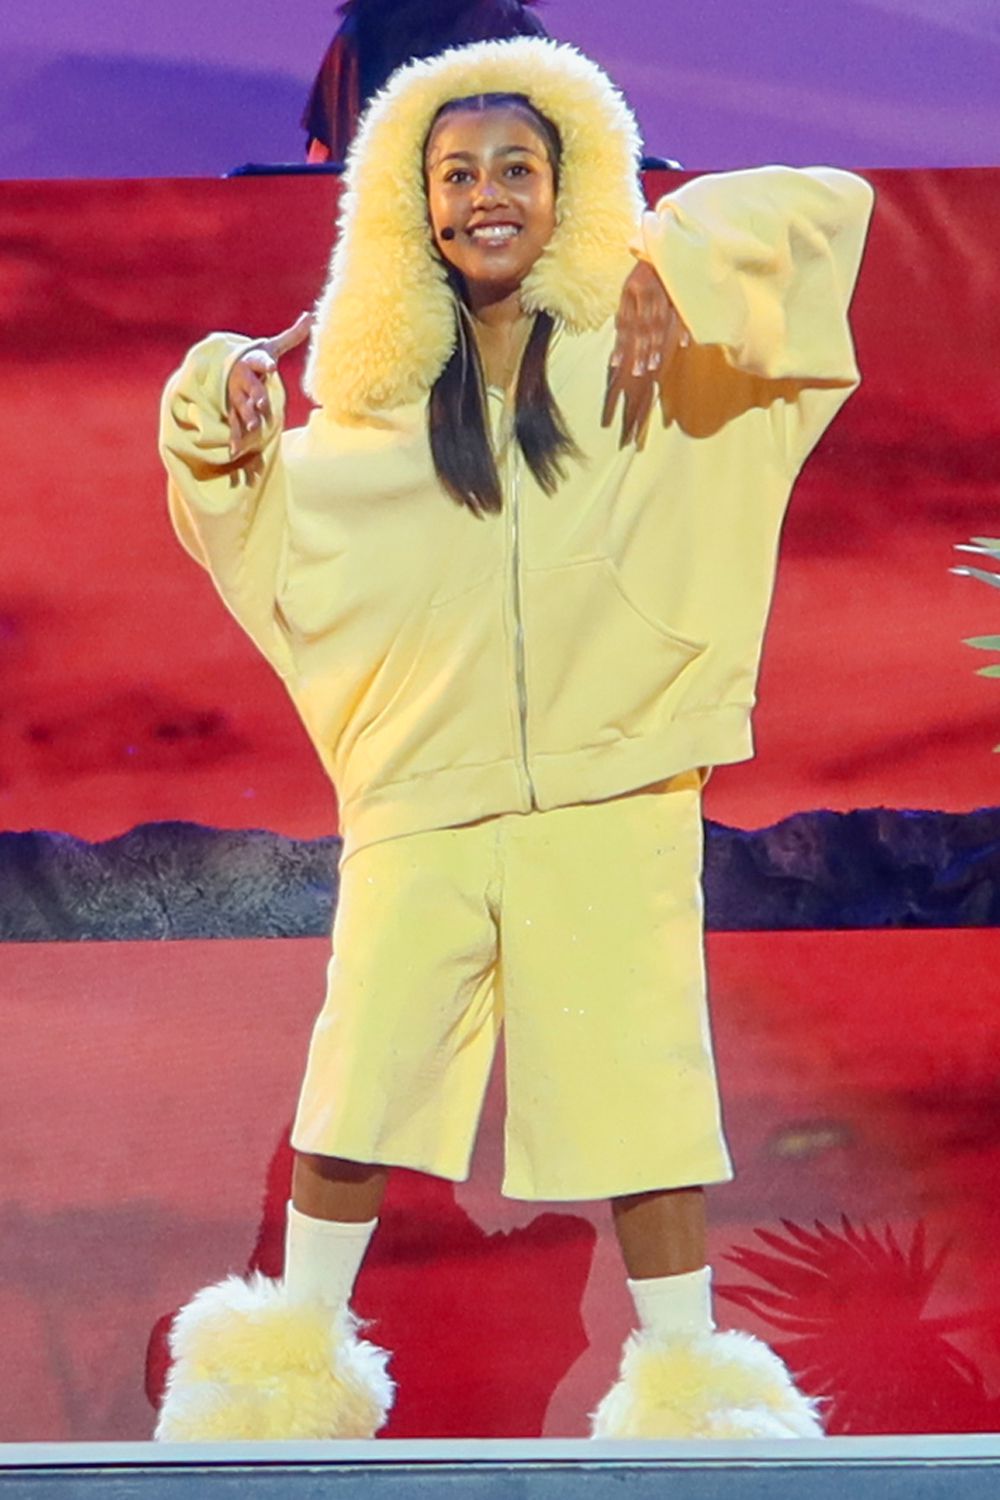 North West peforms as young Simba in Disney's The Lion King performace at Hollywood Bowl in Hollywood, CA. 